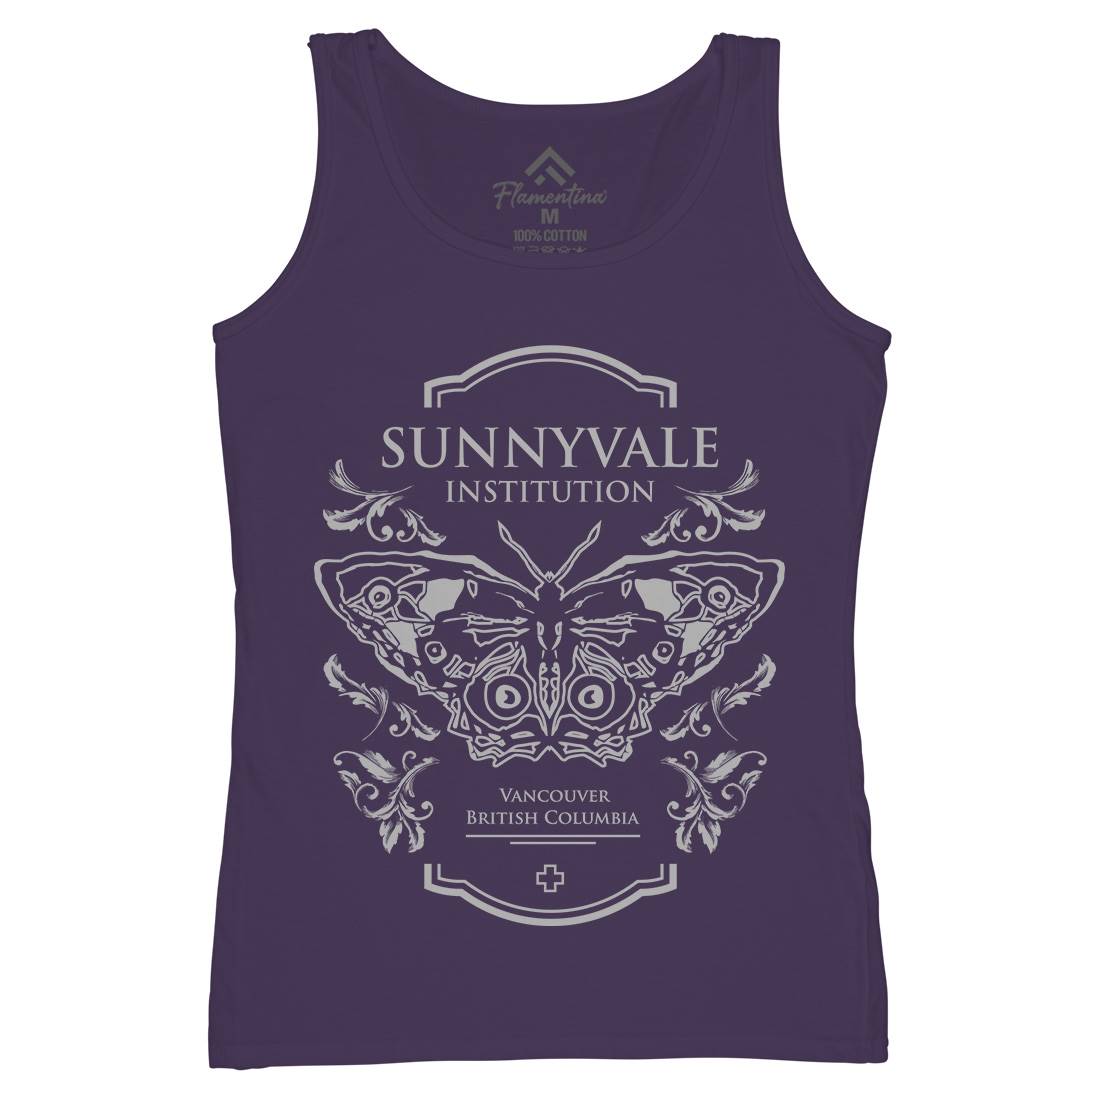 Sunnyvale Institution Womens Organic Tank Top Vest Space D232